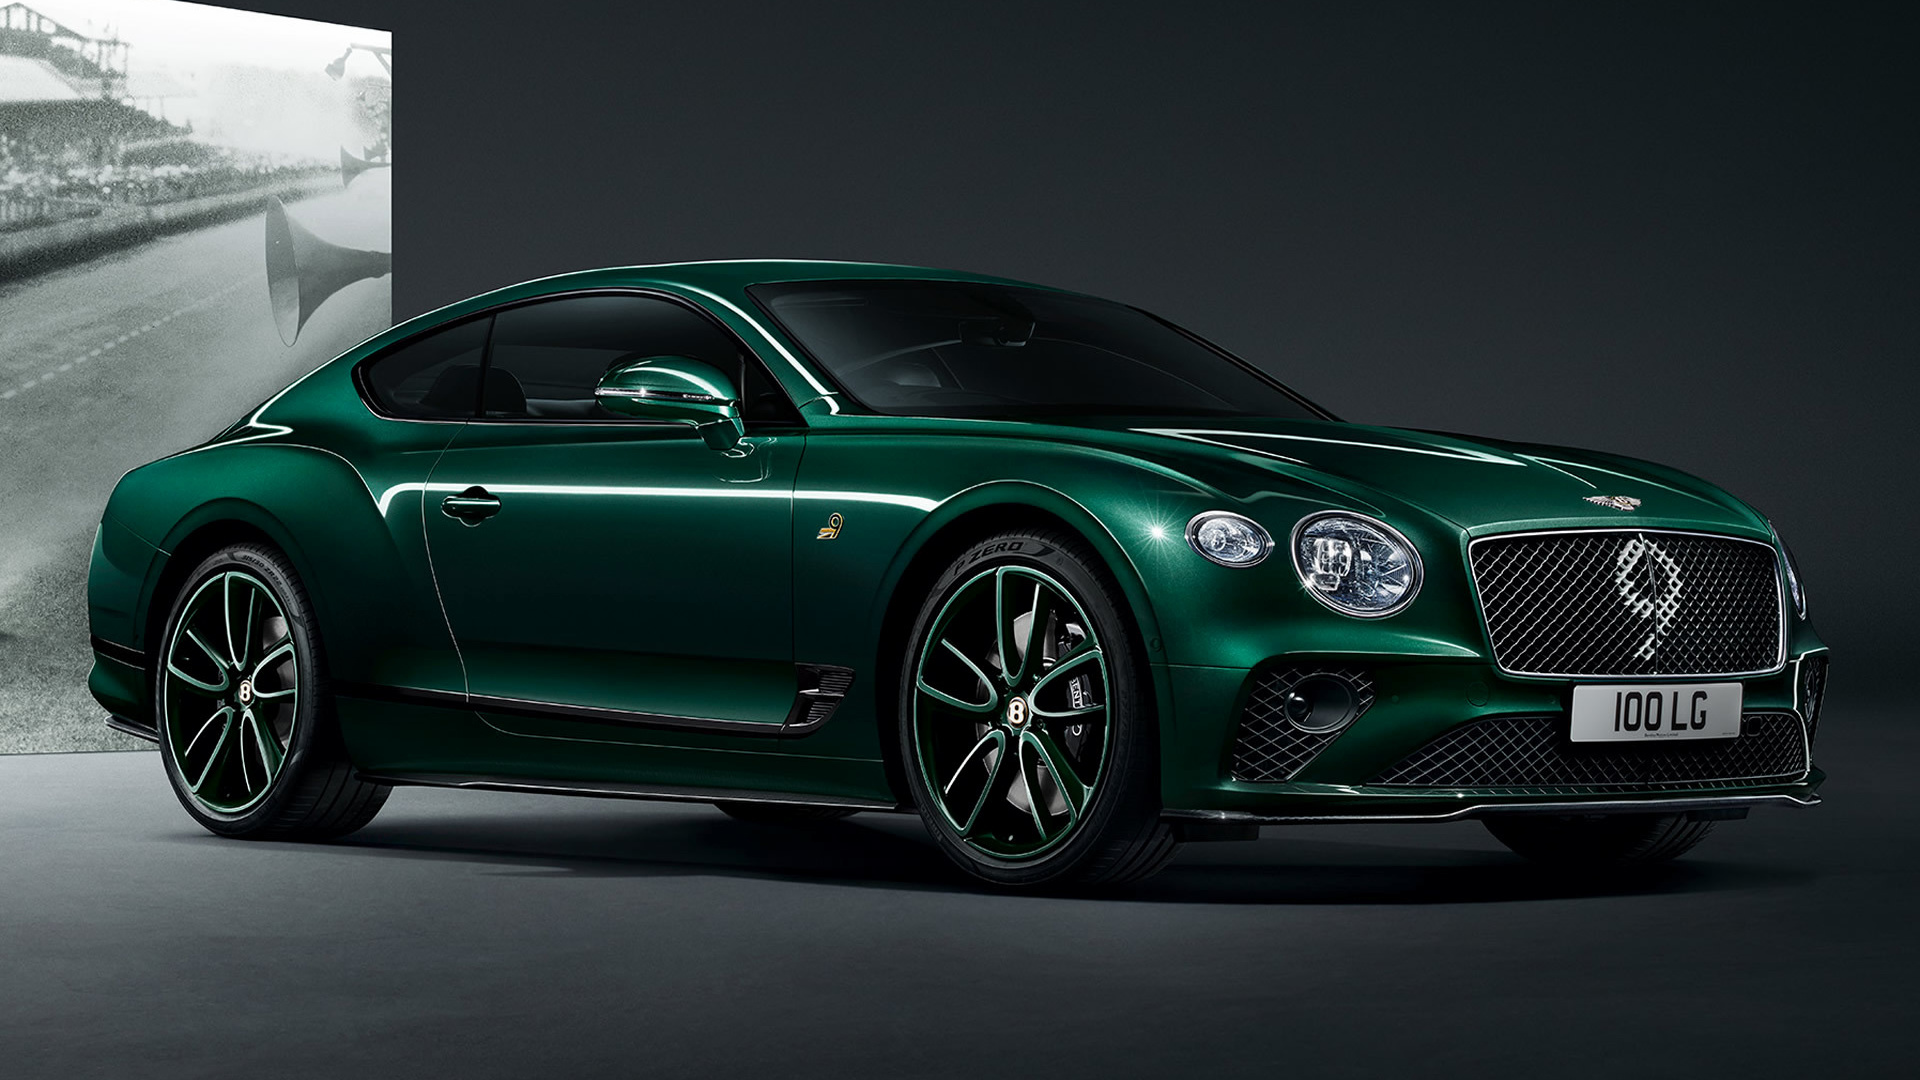 Bentley Continental gt number 9 Edition